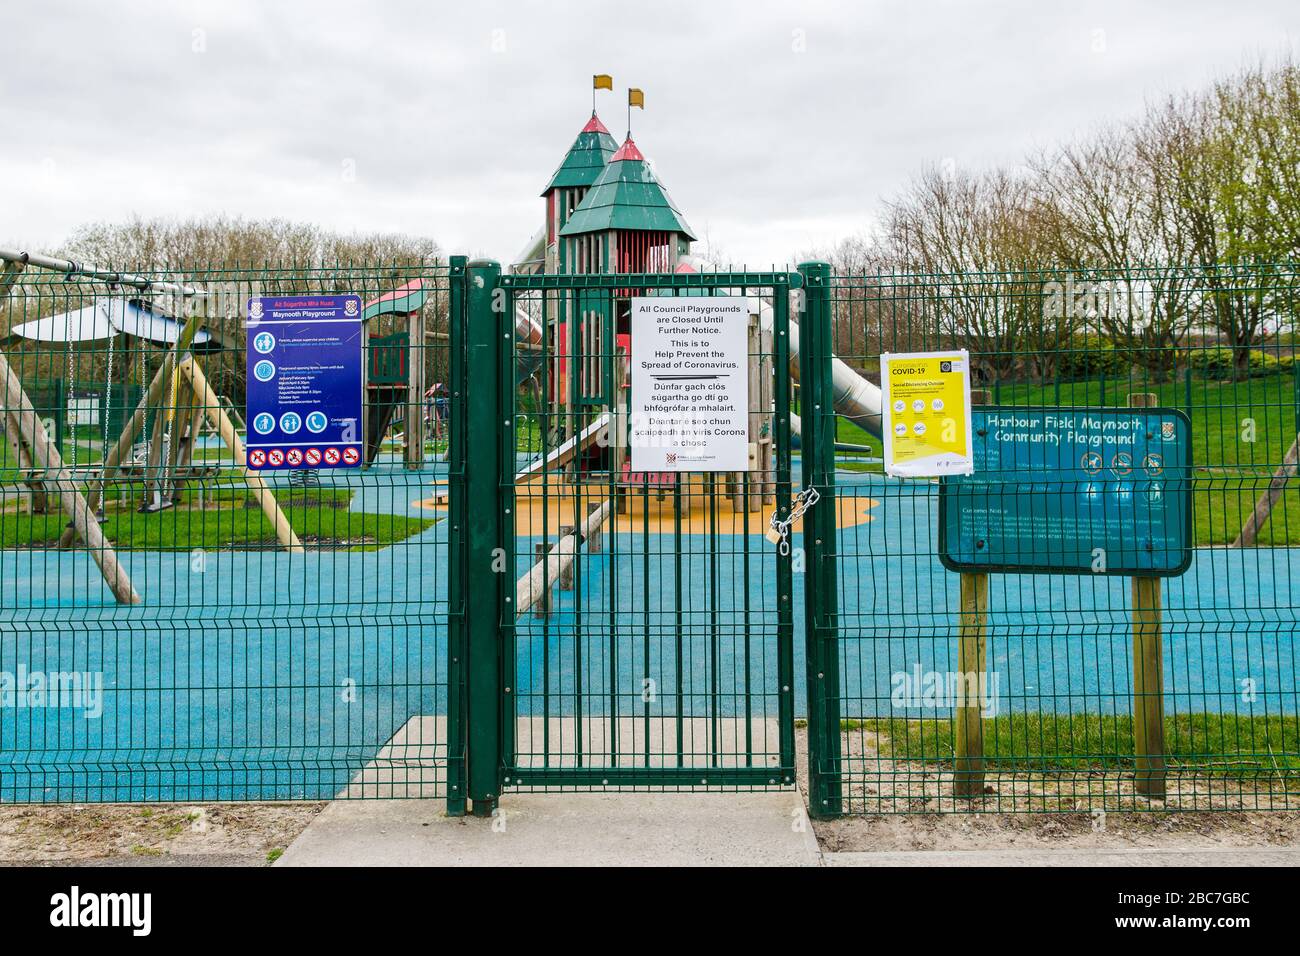 Children`s playground closed until further notice to prevent spread of coronavirus. Civid-19 Pandemic, Maynooth, Co. Kildare, Ireland Stock Photo